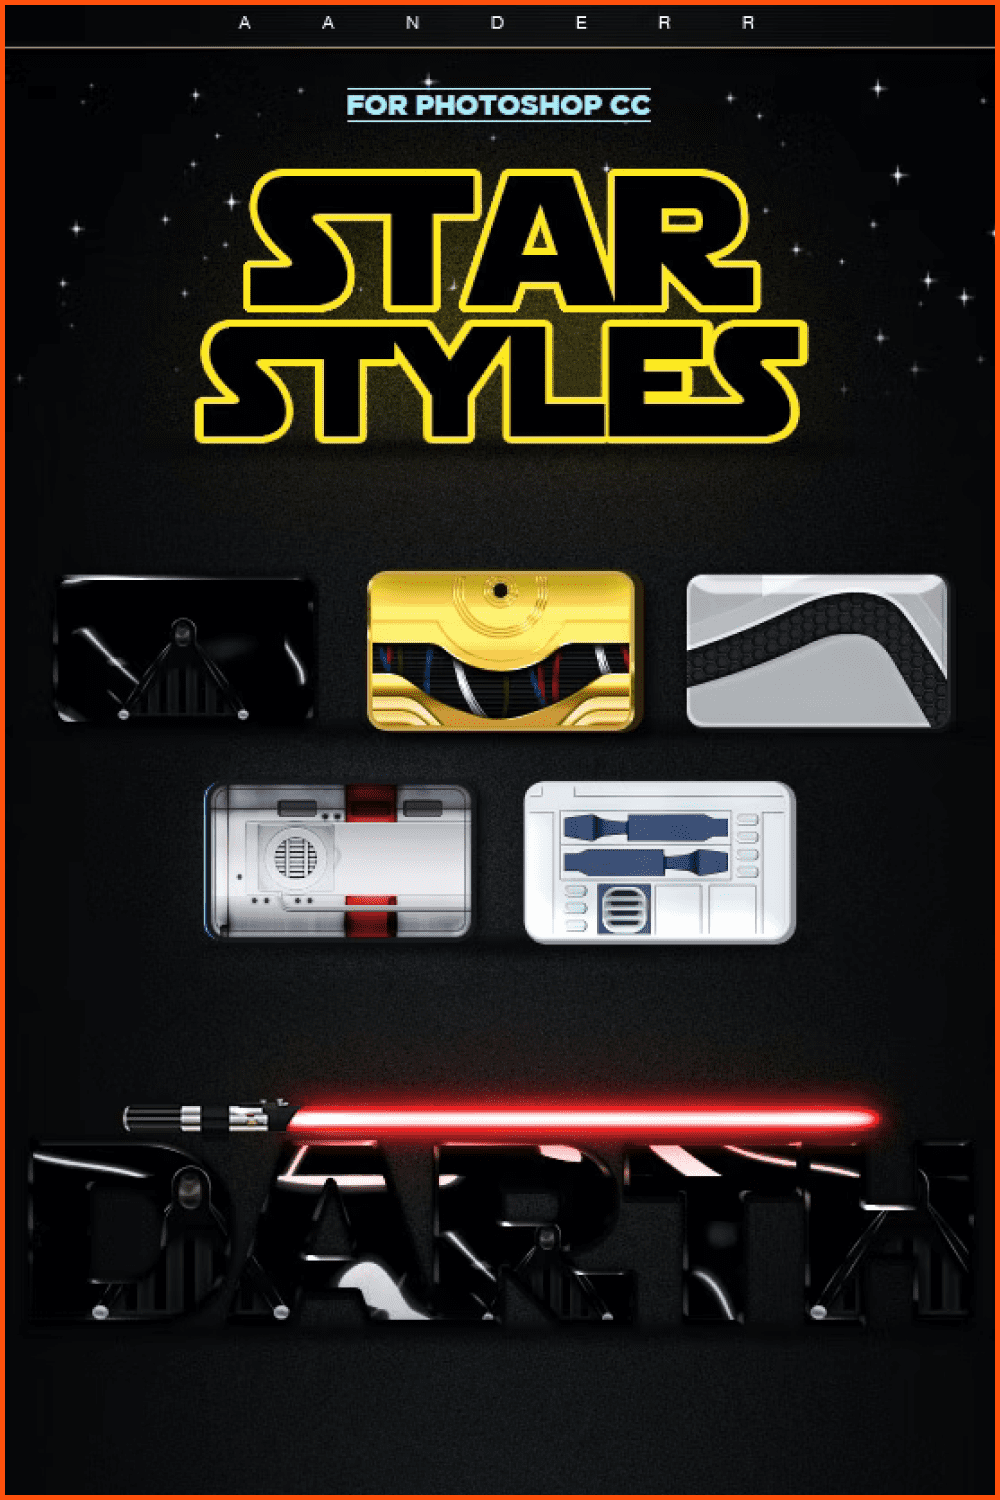 Black theme with red accents. It's perfect for Star Wars. The design alone will convey everything you wanted to say.